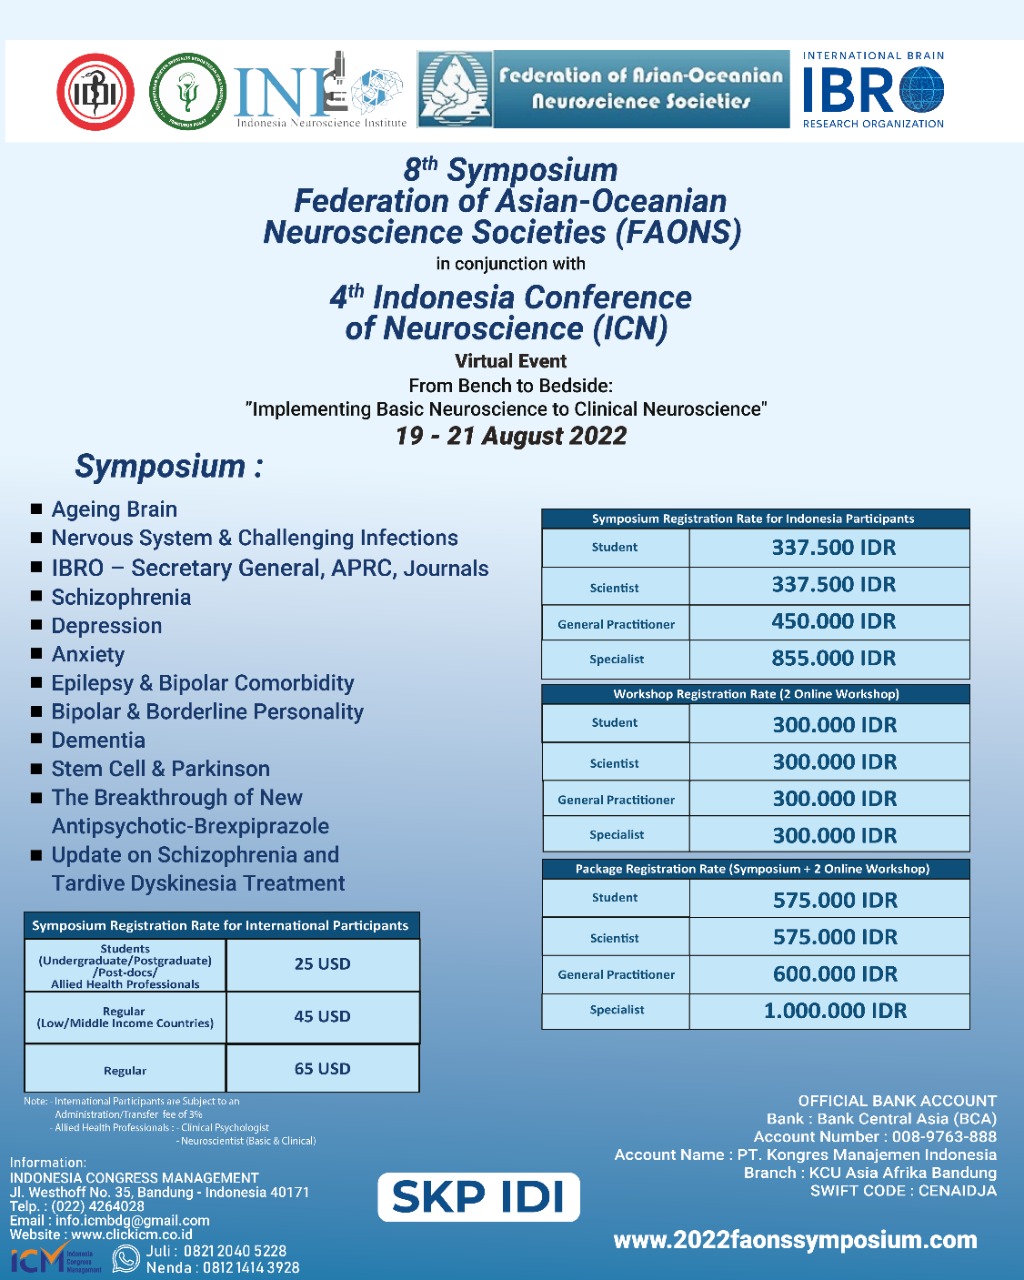 8th Symposium Federation of Asian-Oceanian Neuroscience Societies in conjunction with 4th ICN